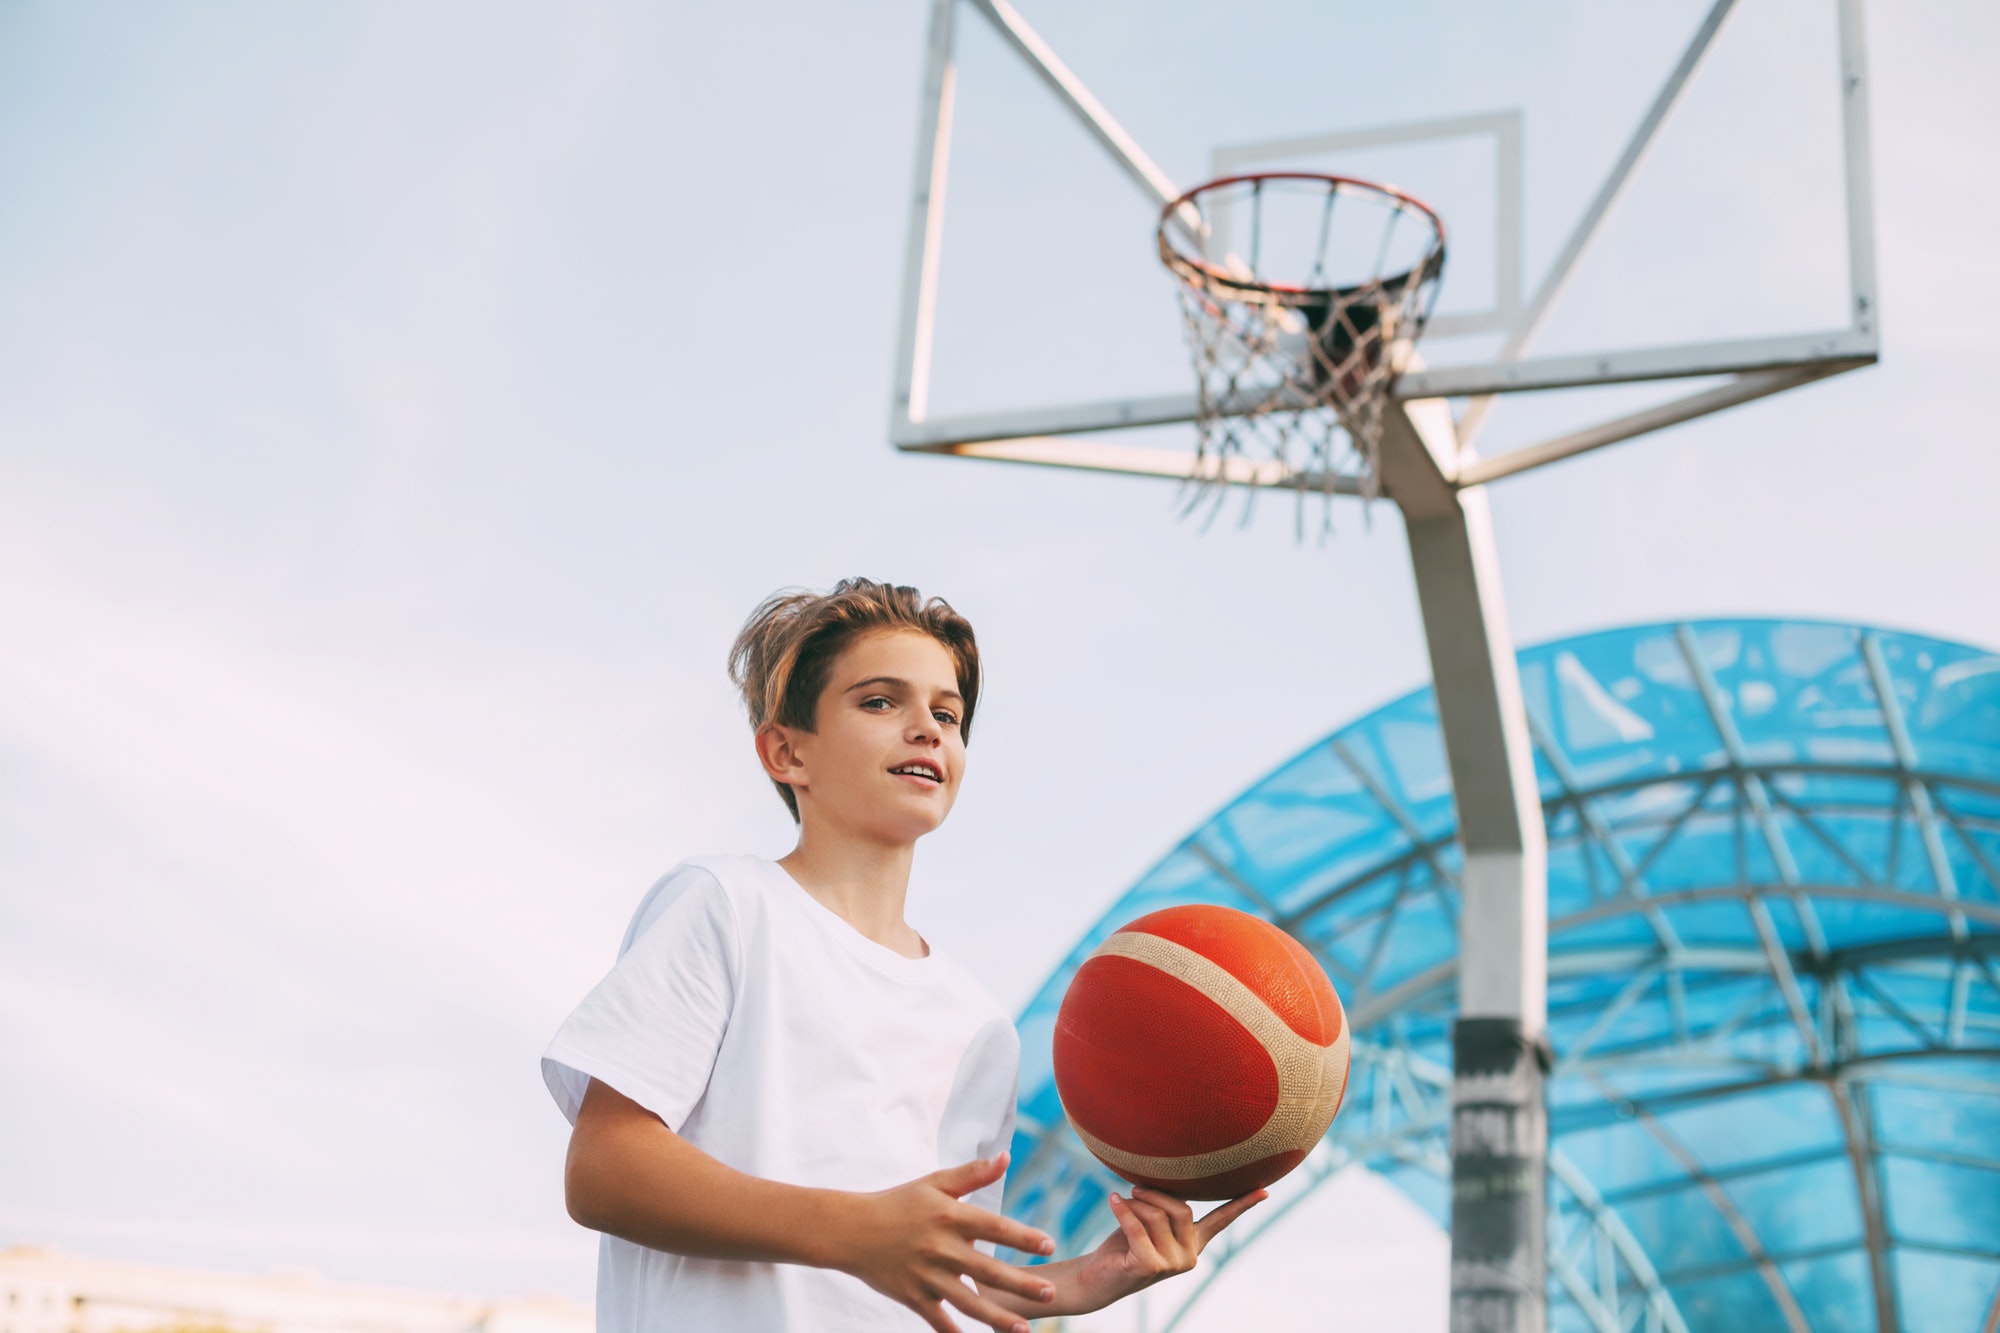 A young teenage basketball player in a white t-shirt stands on the basketball court